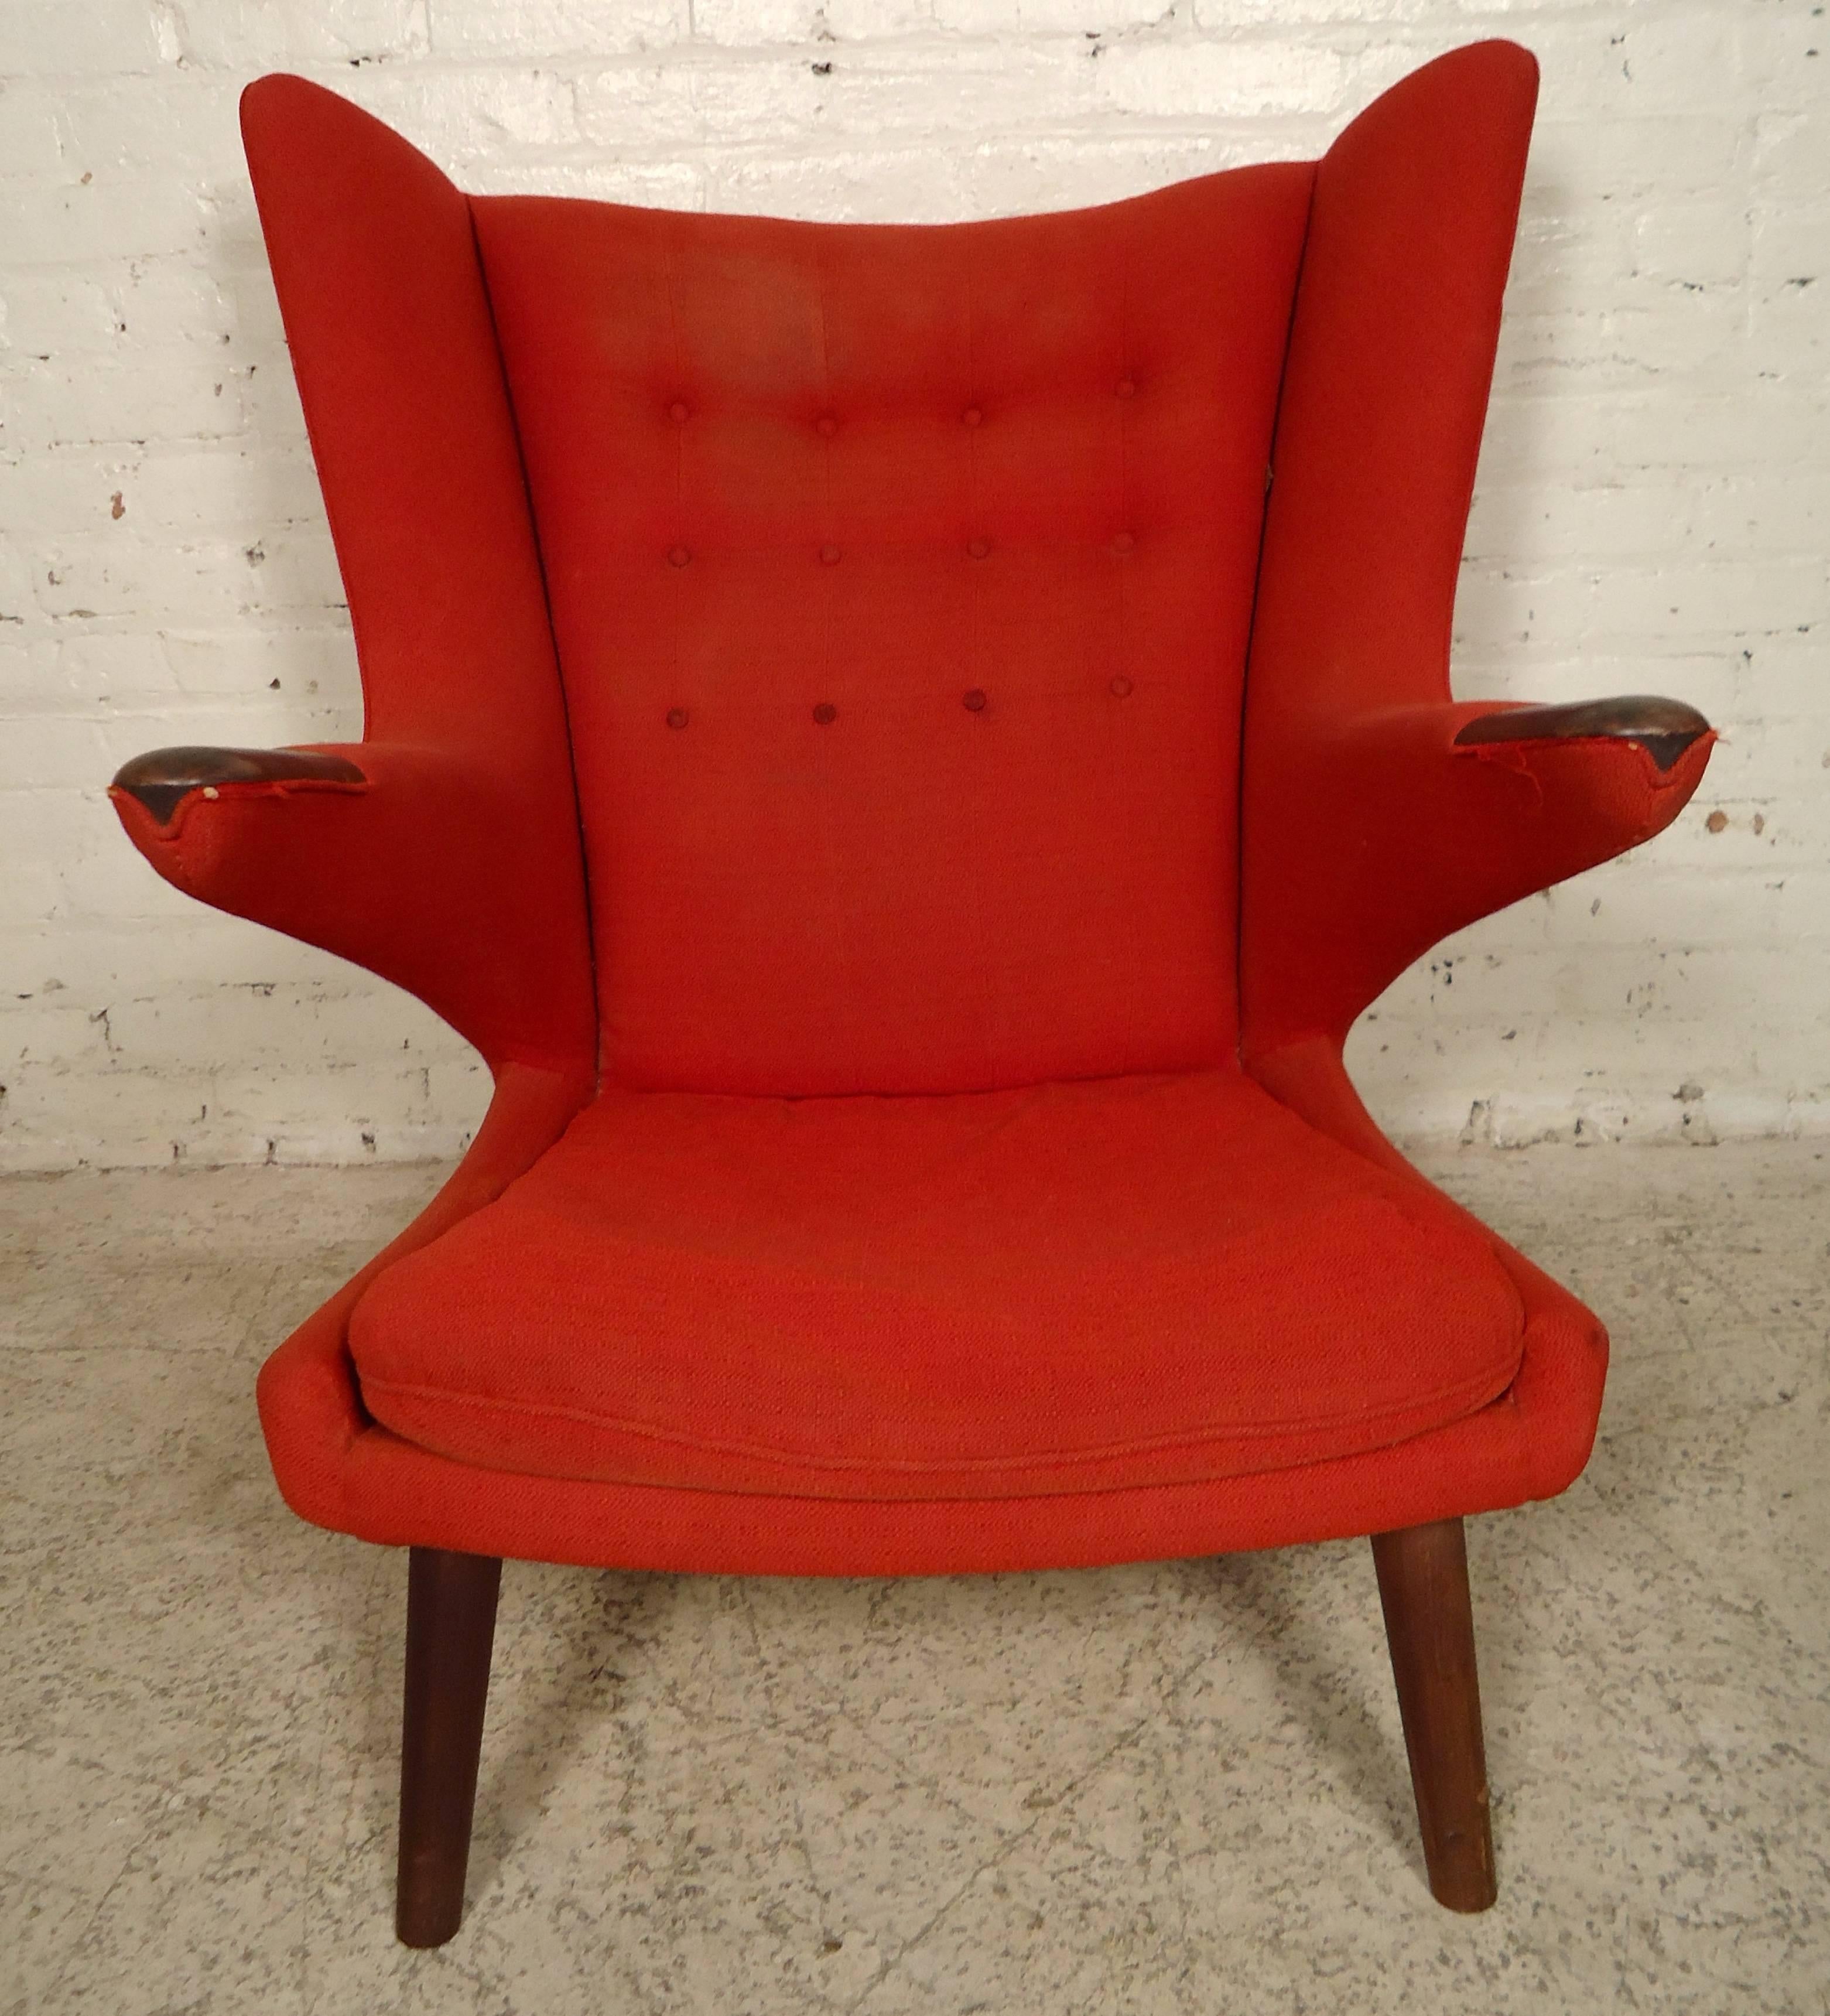 Iconic Hans Wegner Papa Bear chair in red, designed in the 1950s and produced by AP Stolen. This Papa Bear features tipped walnut armrests and a button tufted seat back making this cozy reading/lounge chair standout. 

Please confirm item location